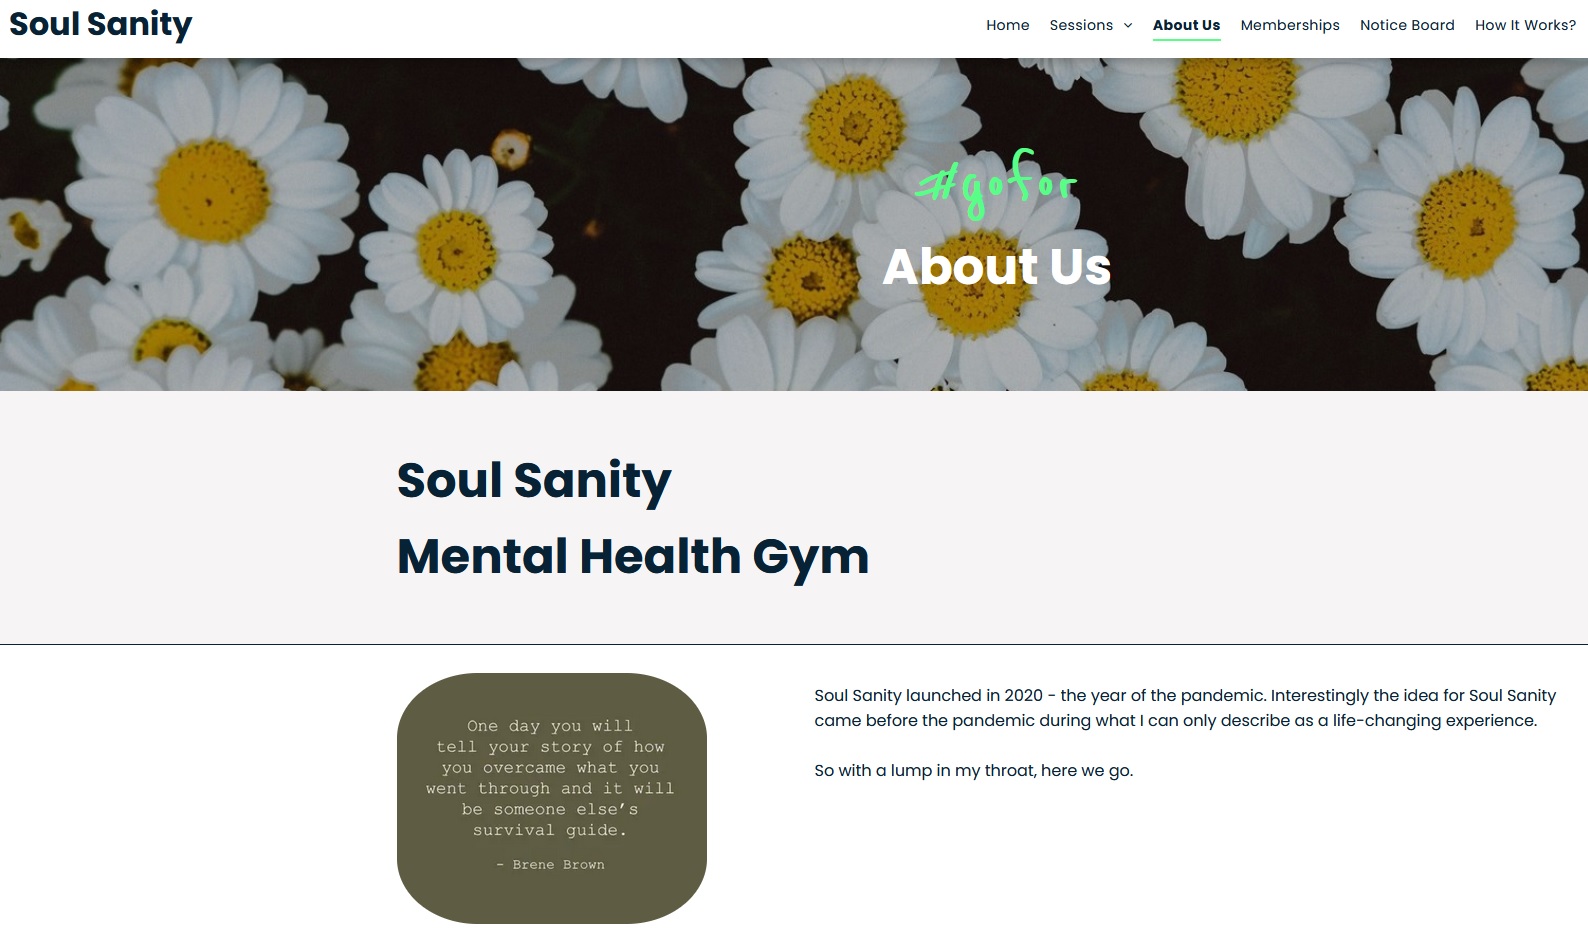 Soul Sanity - Corporate Laughter Yoga Training & Workshop Specialists in the UK | Corporate Wellness & Workplace Wellbeing Programmes, Trainings & Workshops in London UK with Laughter Yoga Expert Lotte Mikkelsen